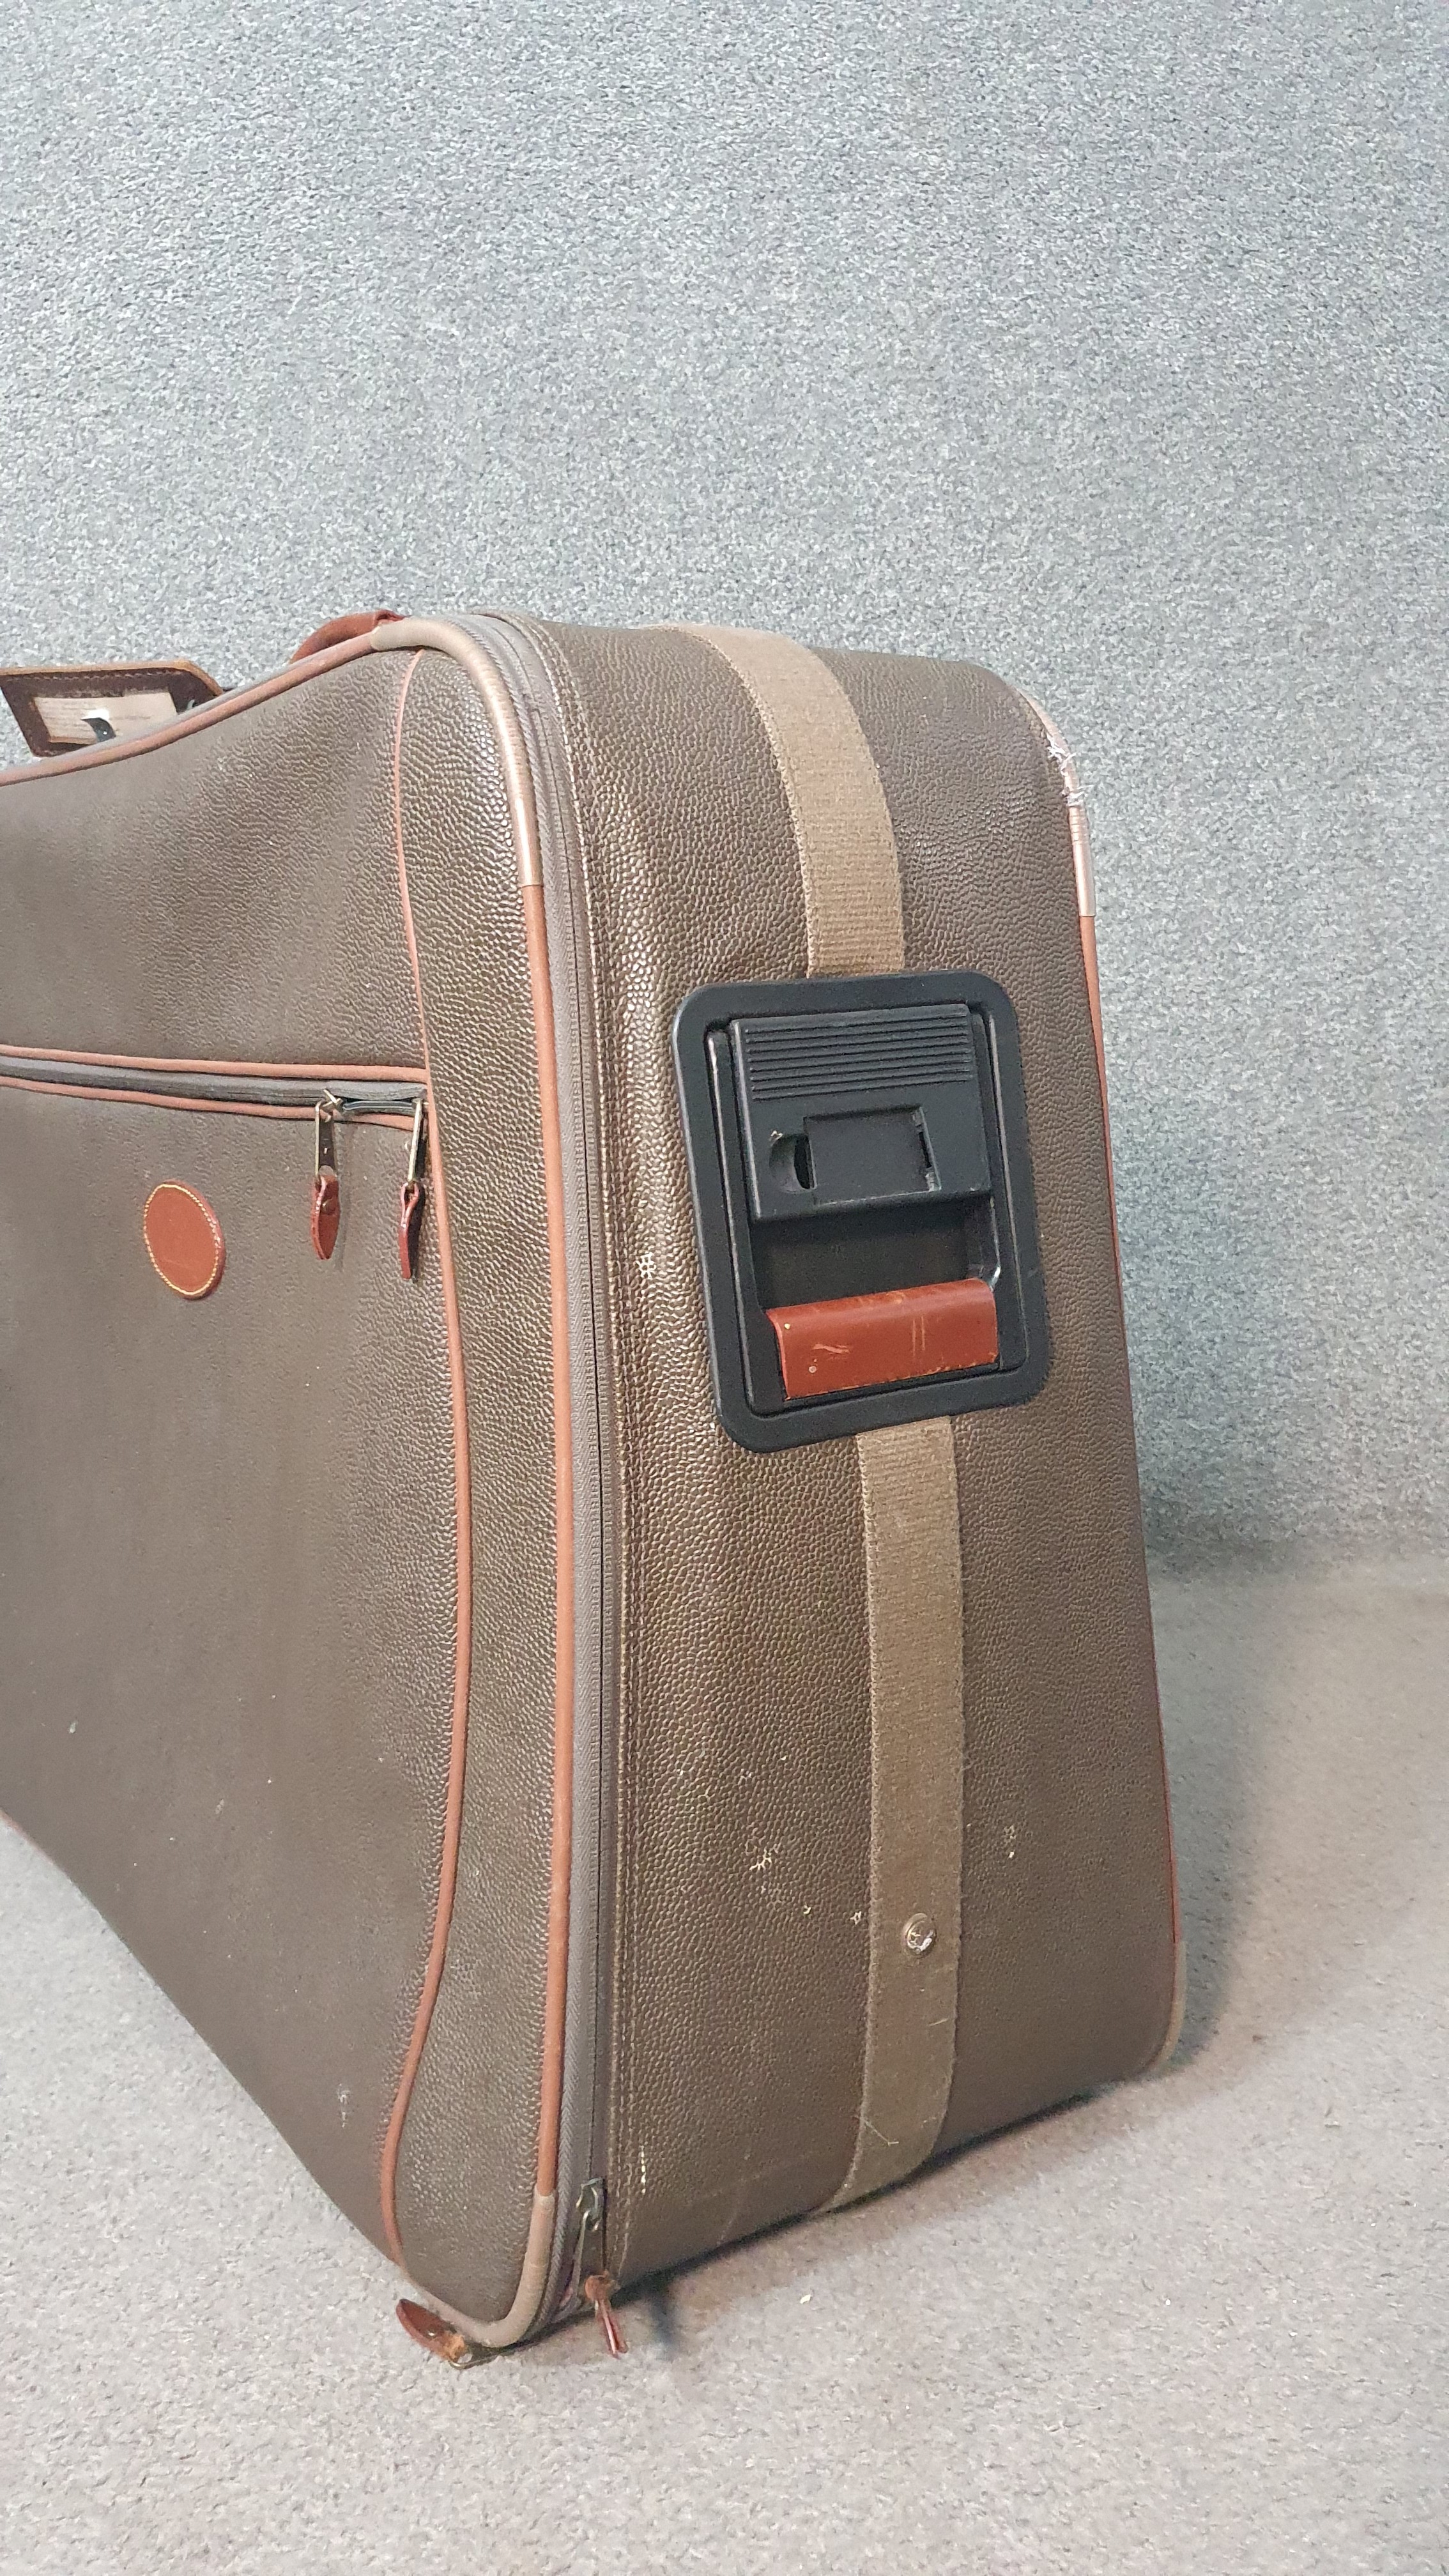 A Mulberry scotchgrain leather travelling case with wheels and spring loaded extending handle, - Image 8 of 8